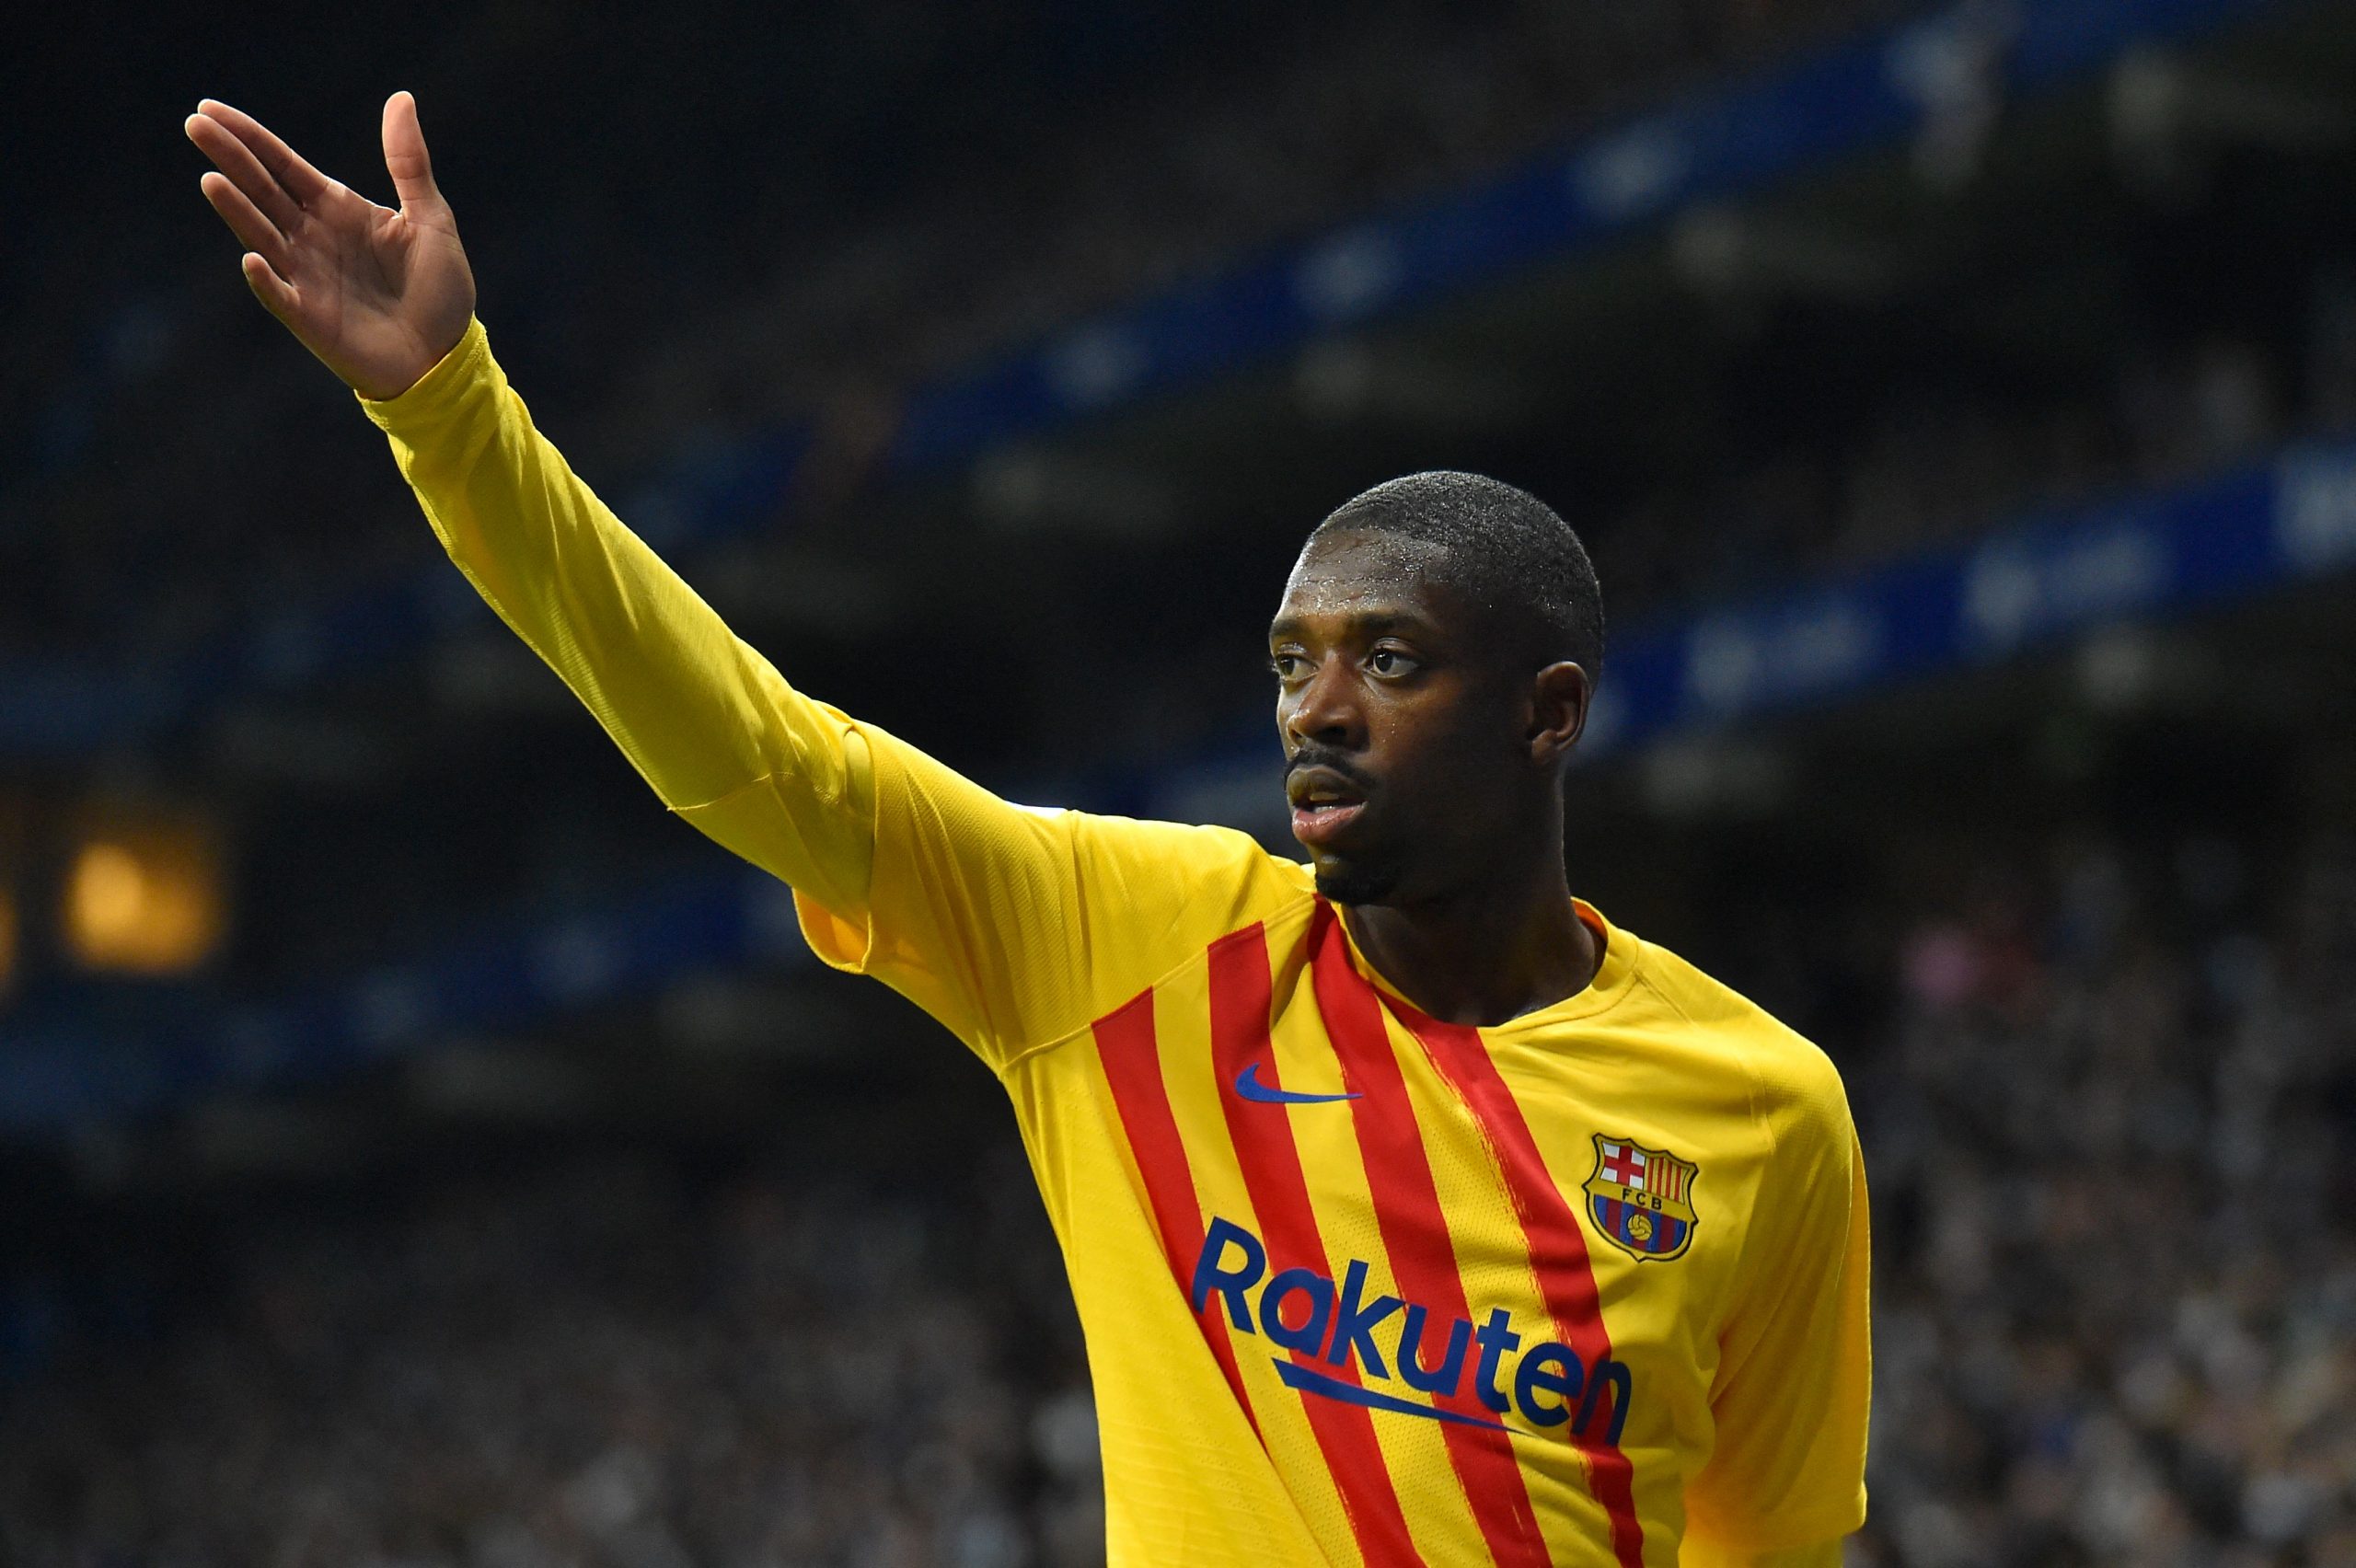 Ousmane Dembélé to decide between Chelsea and Barcelona contract offers